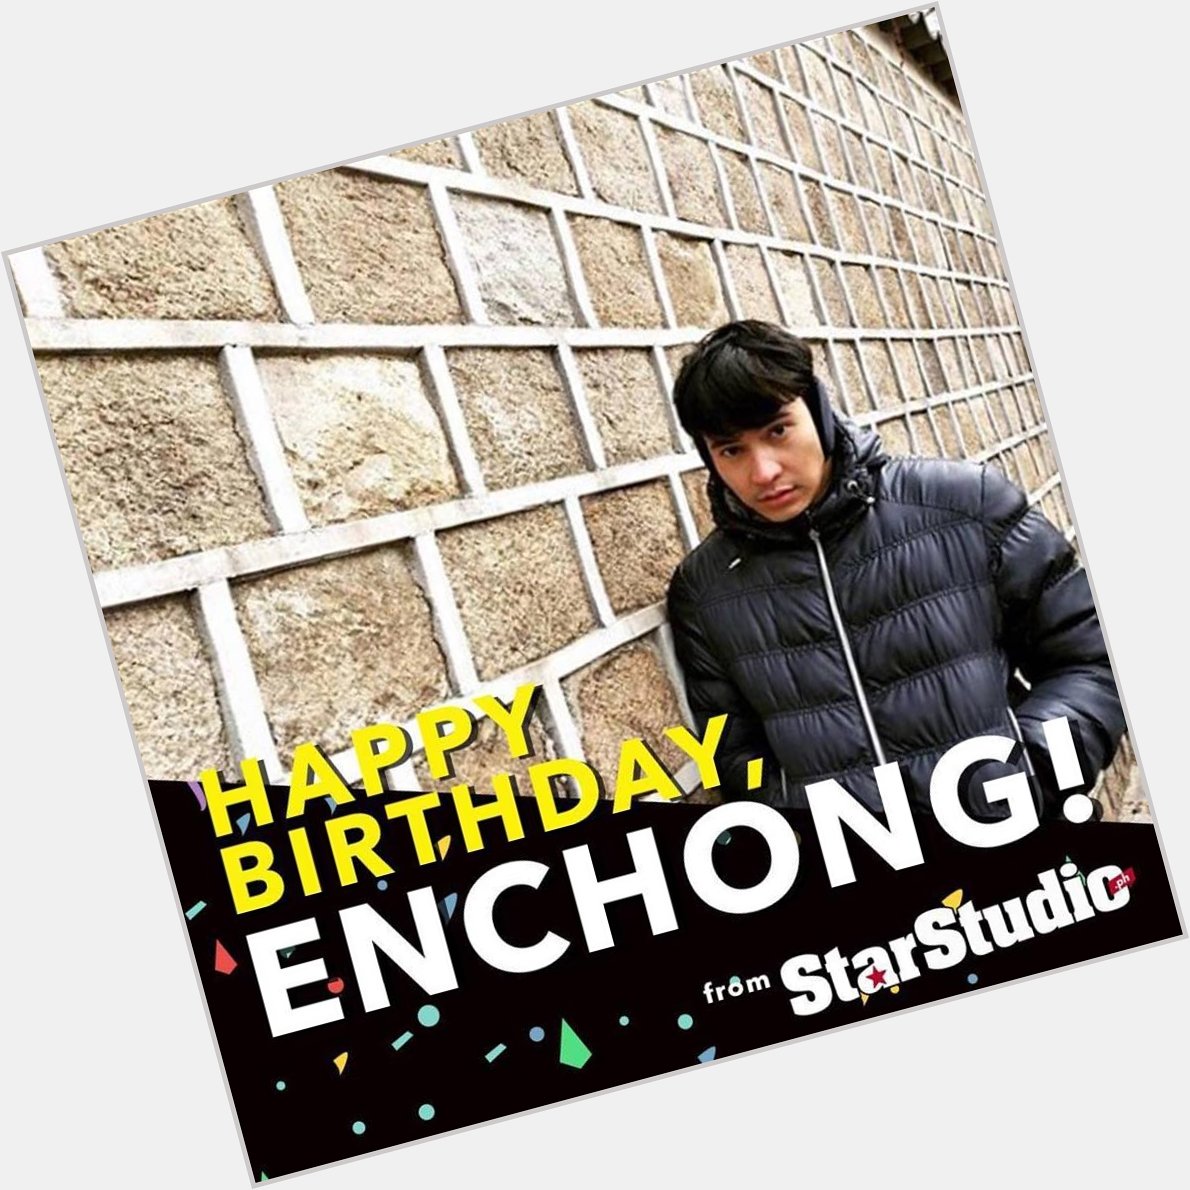 Happy birthday to the travel freak - Enchong Dee! Have fun in your travels! 
Photo from 